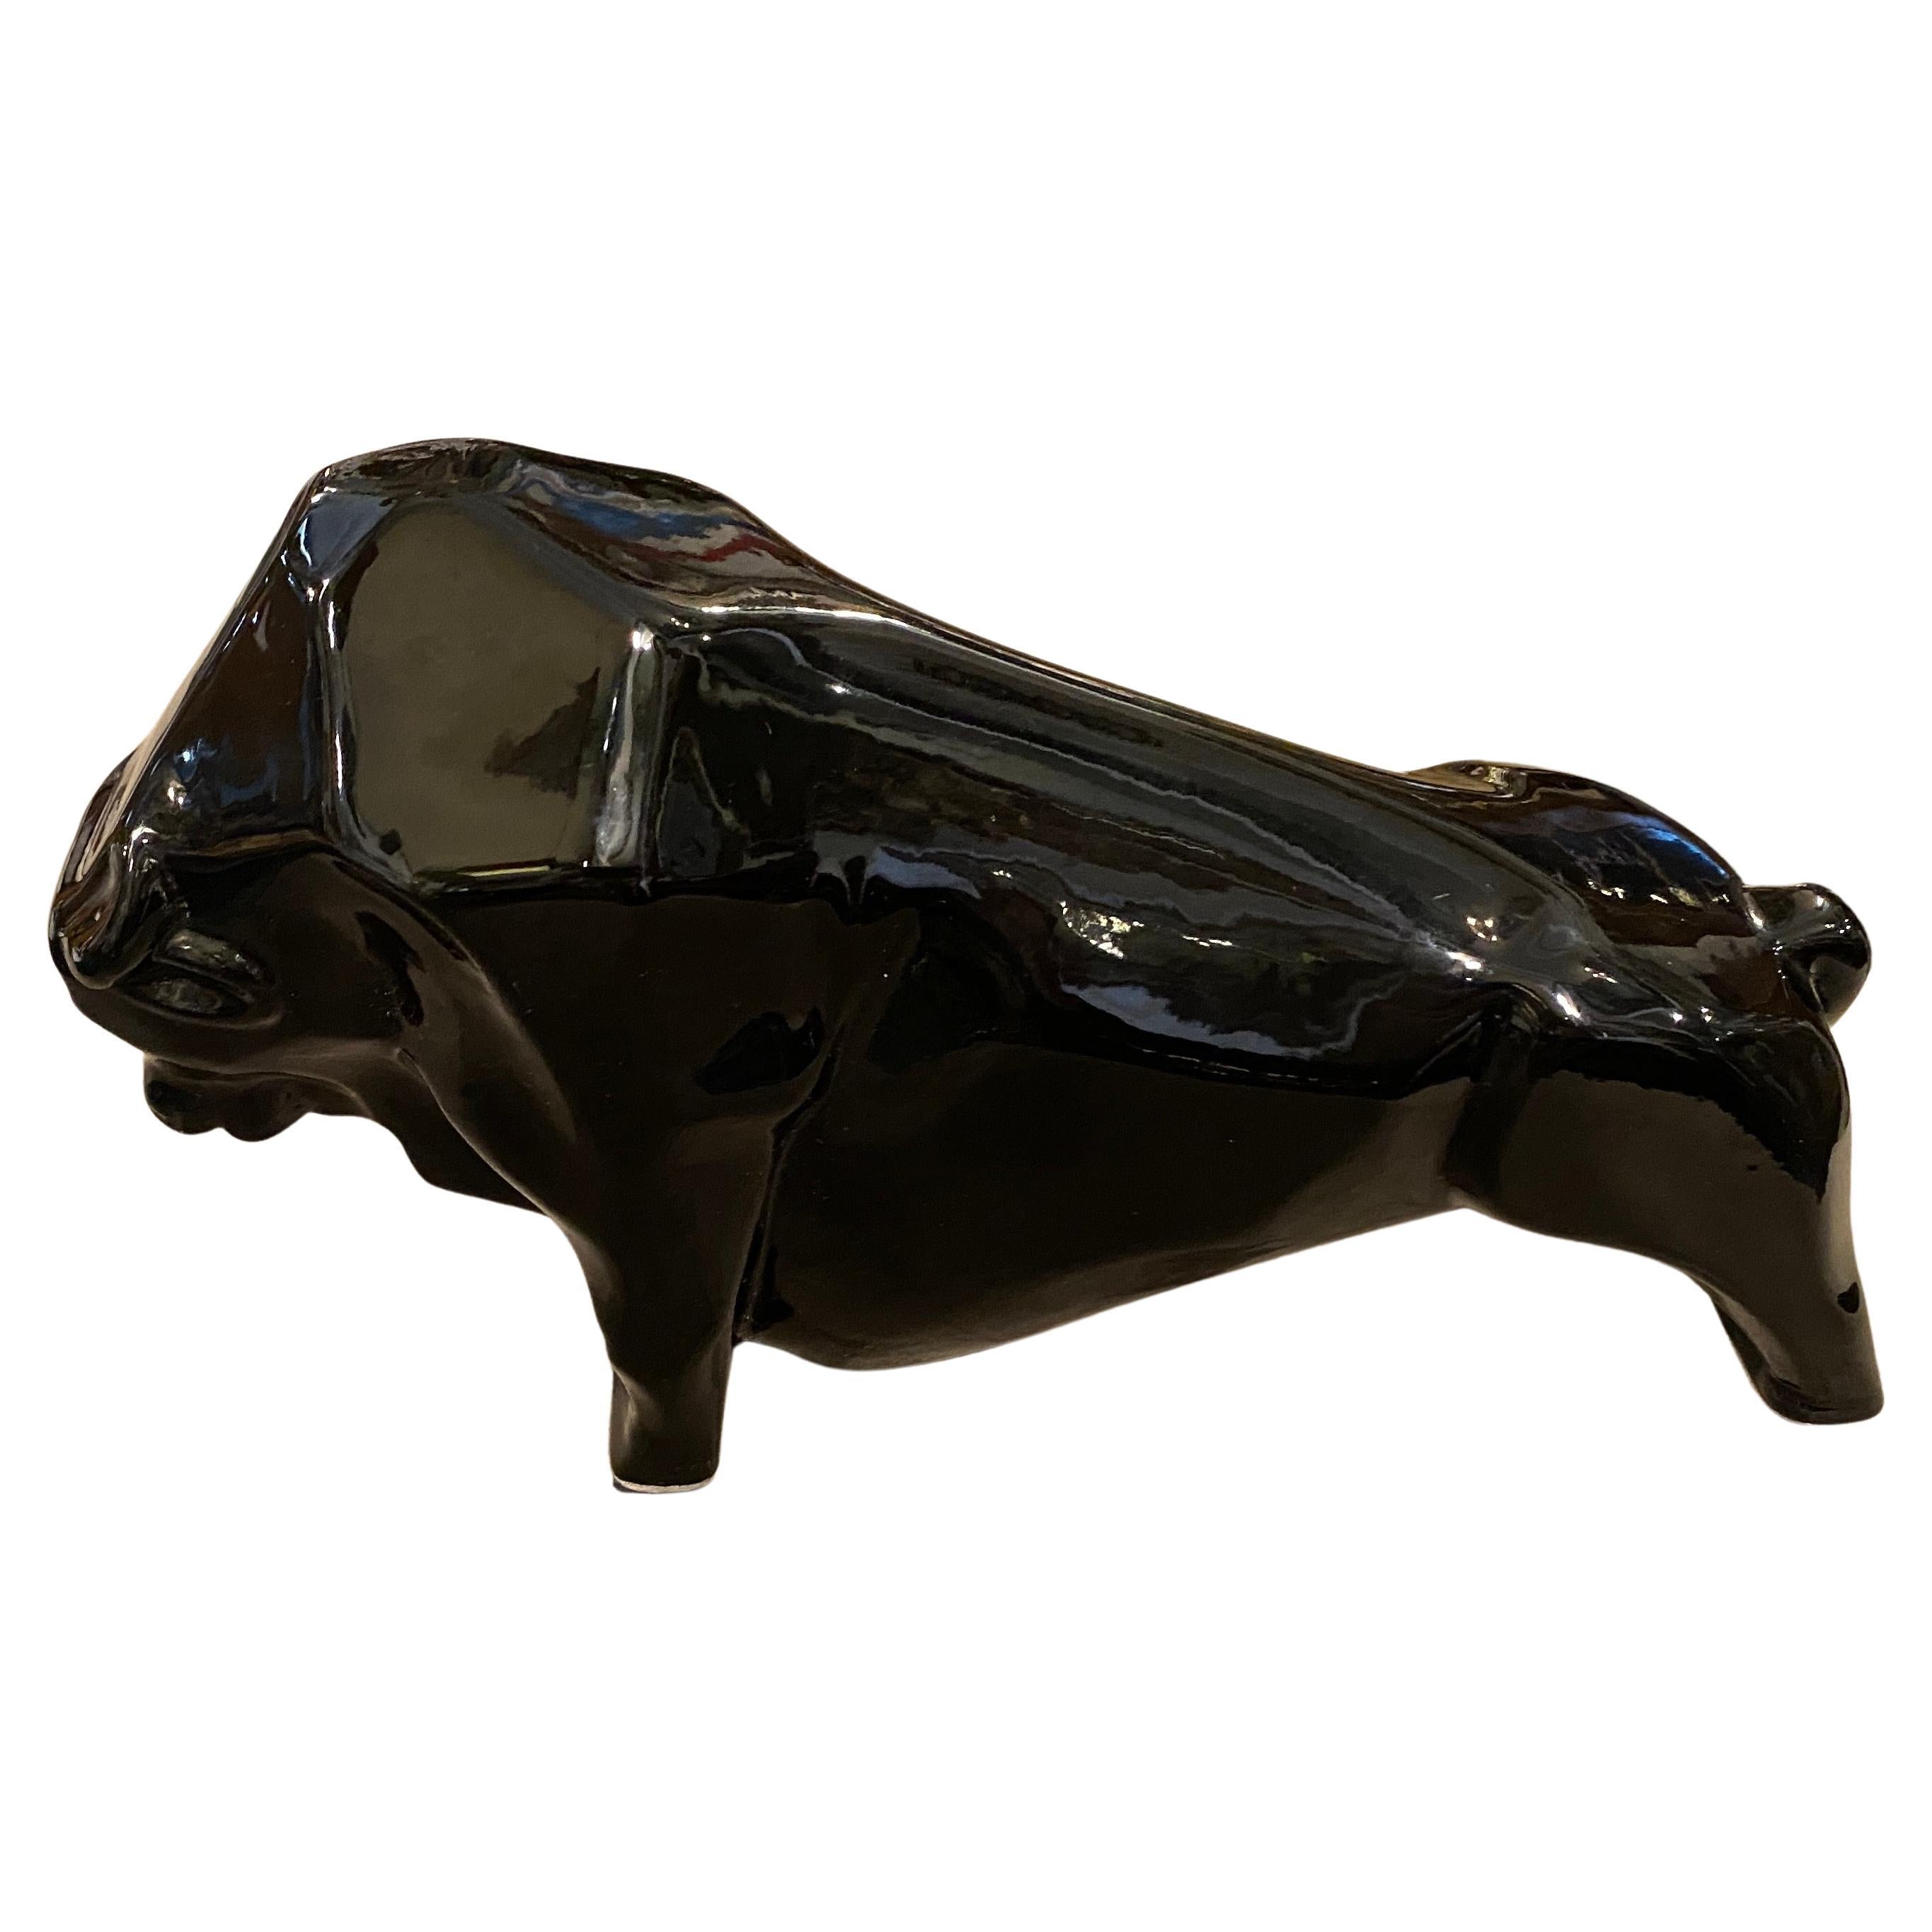 A stylish black ceramic bull probably made in Italy in the Eighties. It's in perfect conditions.